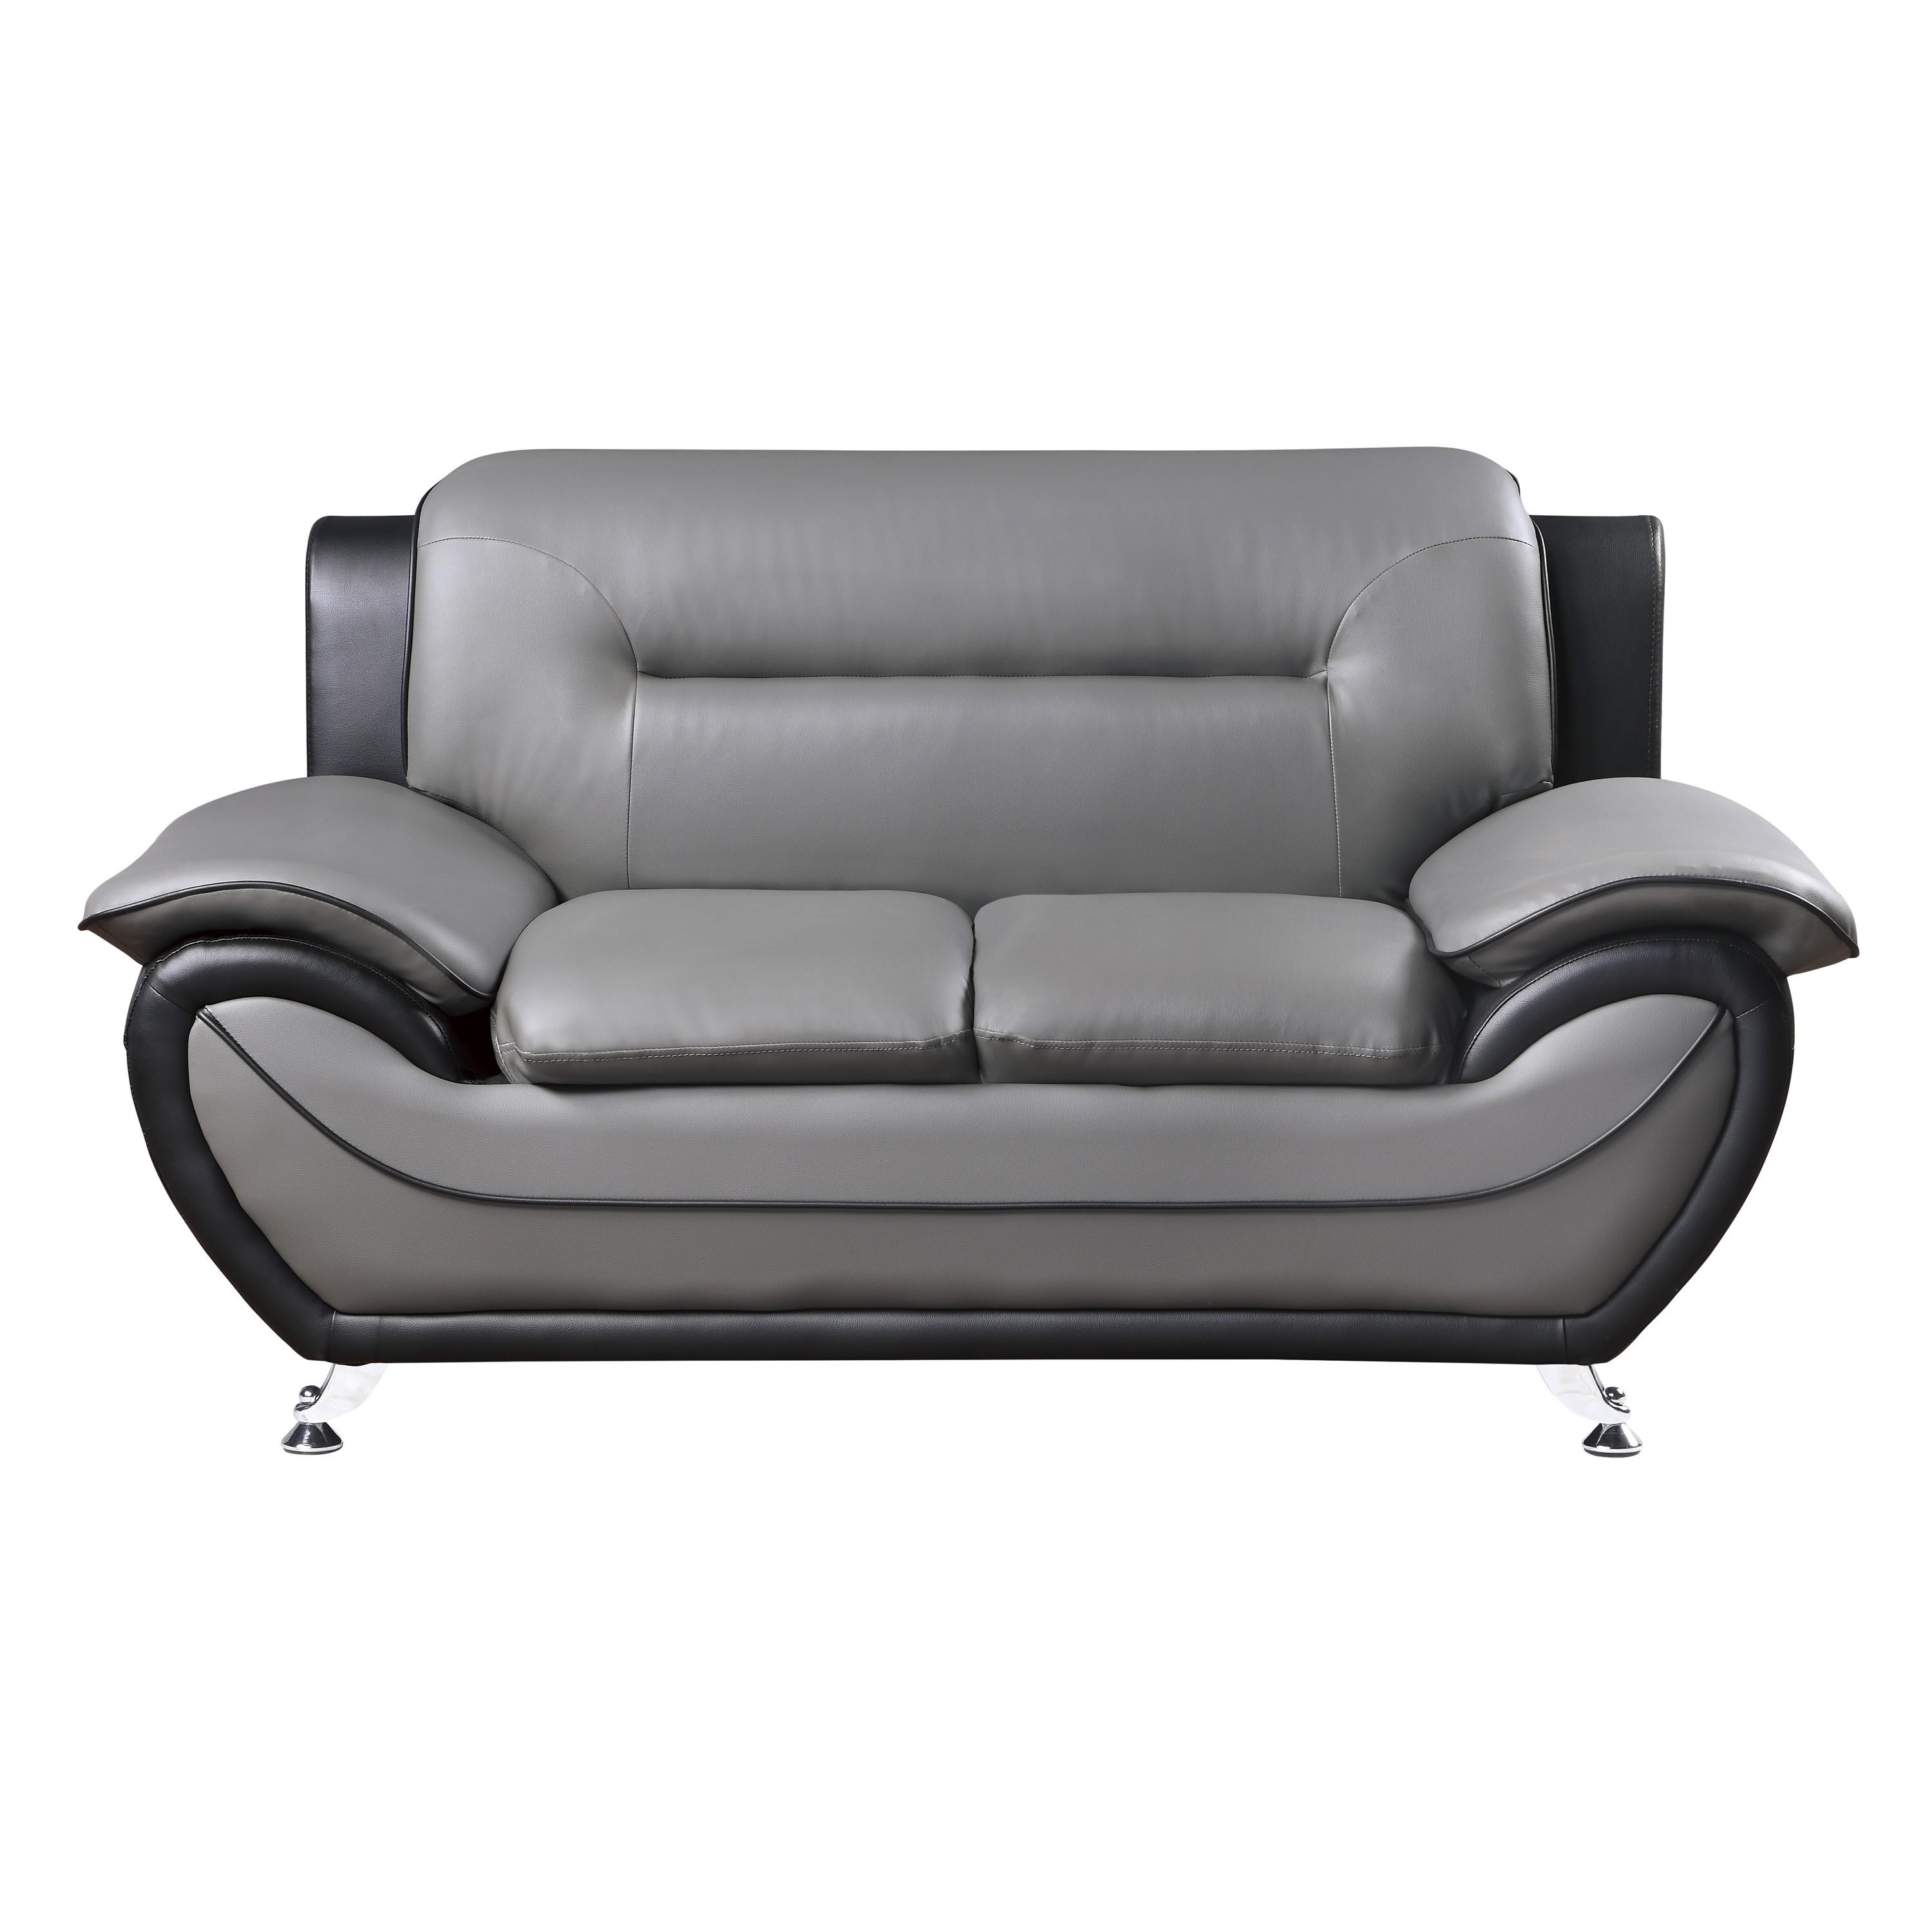 Contemporary Loveseat 9419-2 Matteo 9419-2 in Gray Faux Leather